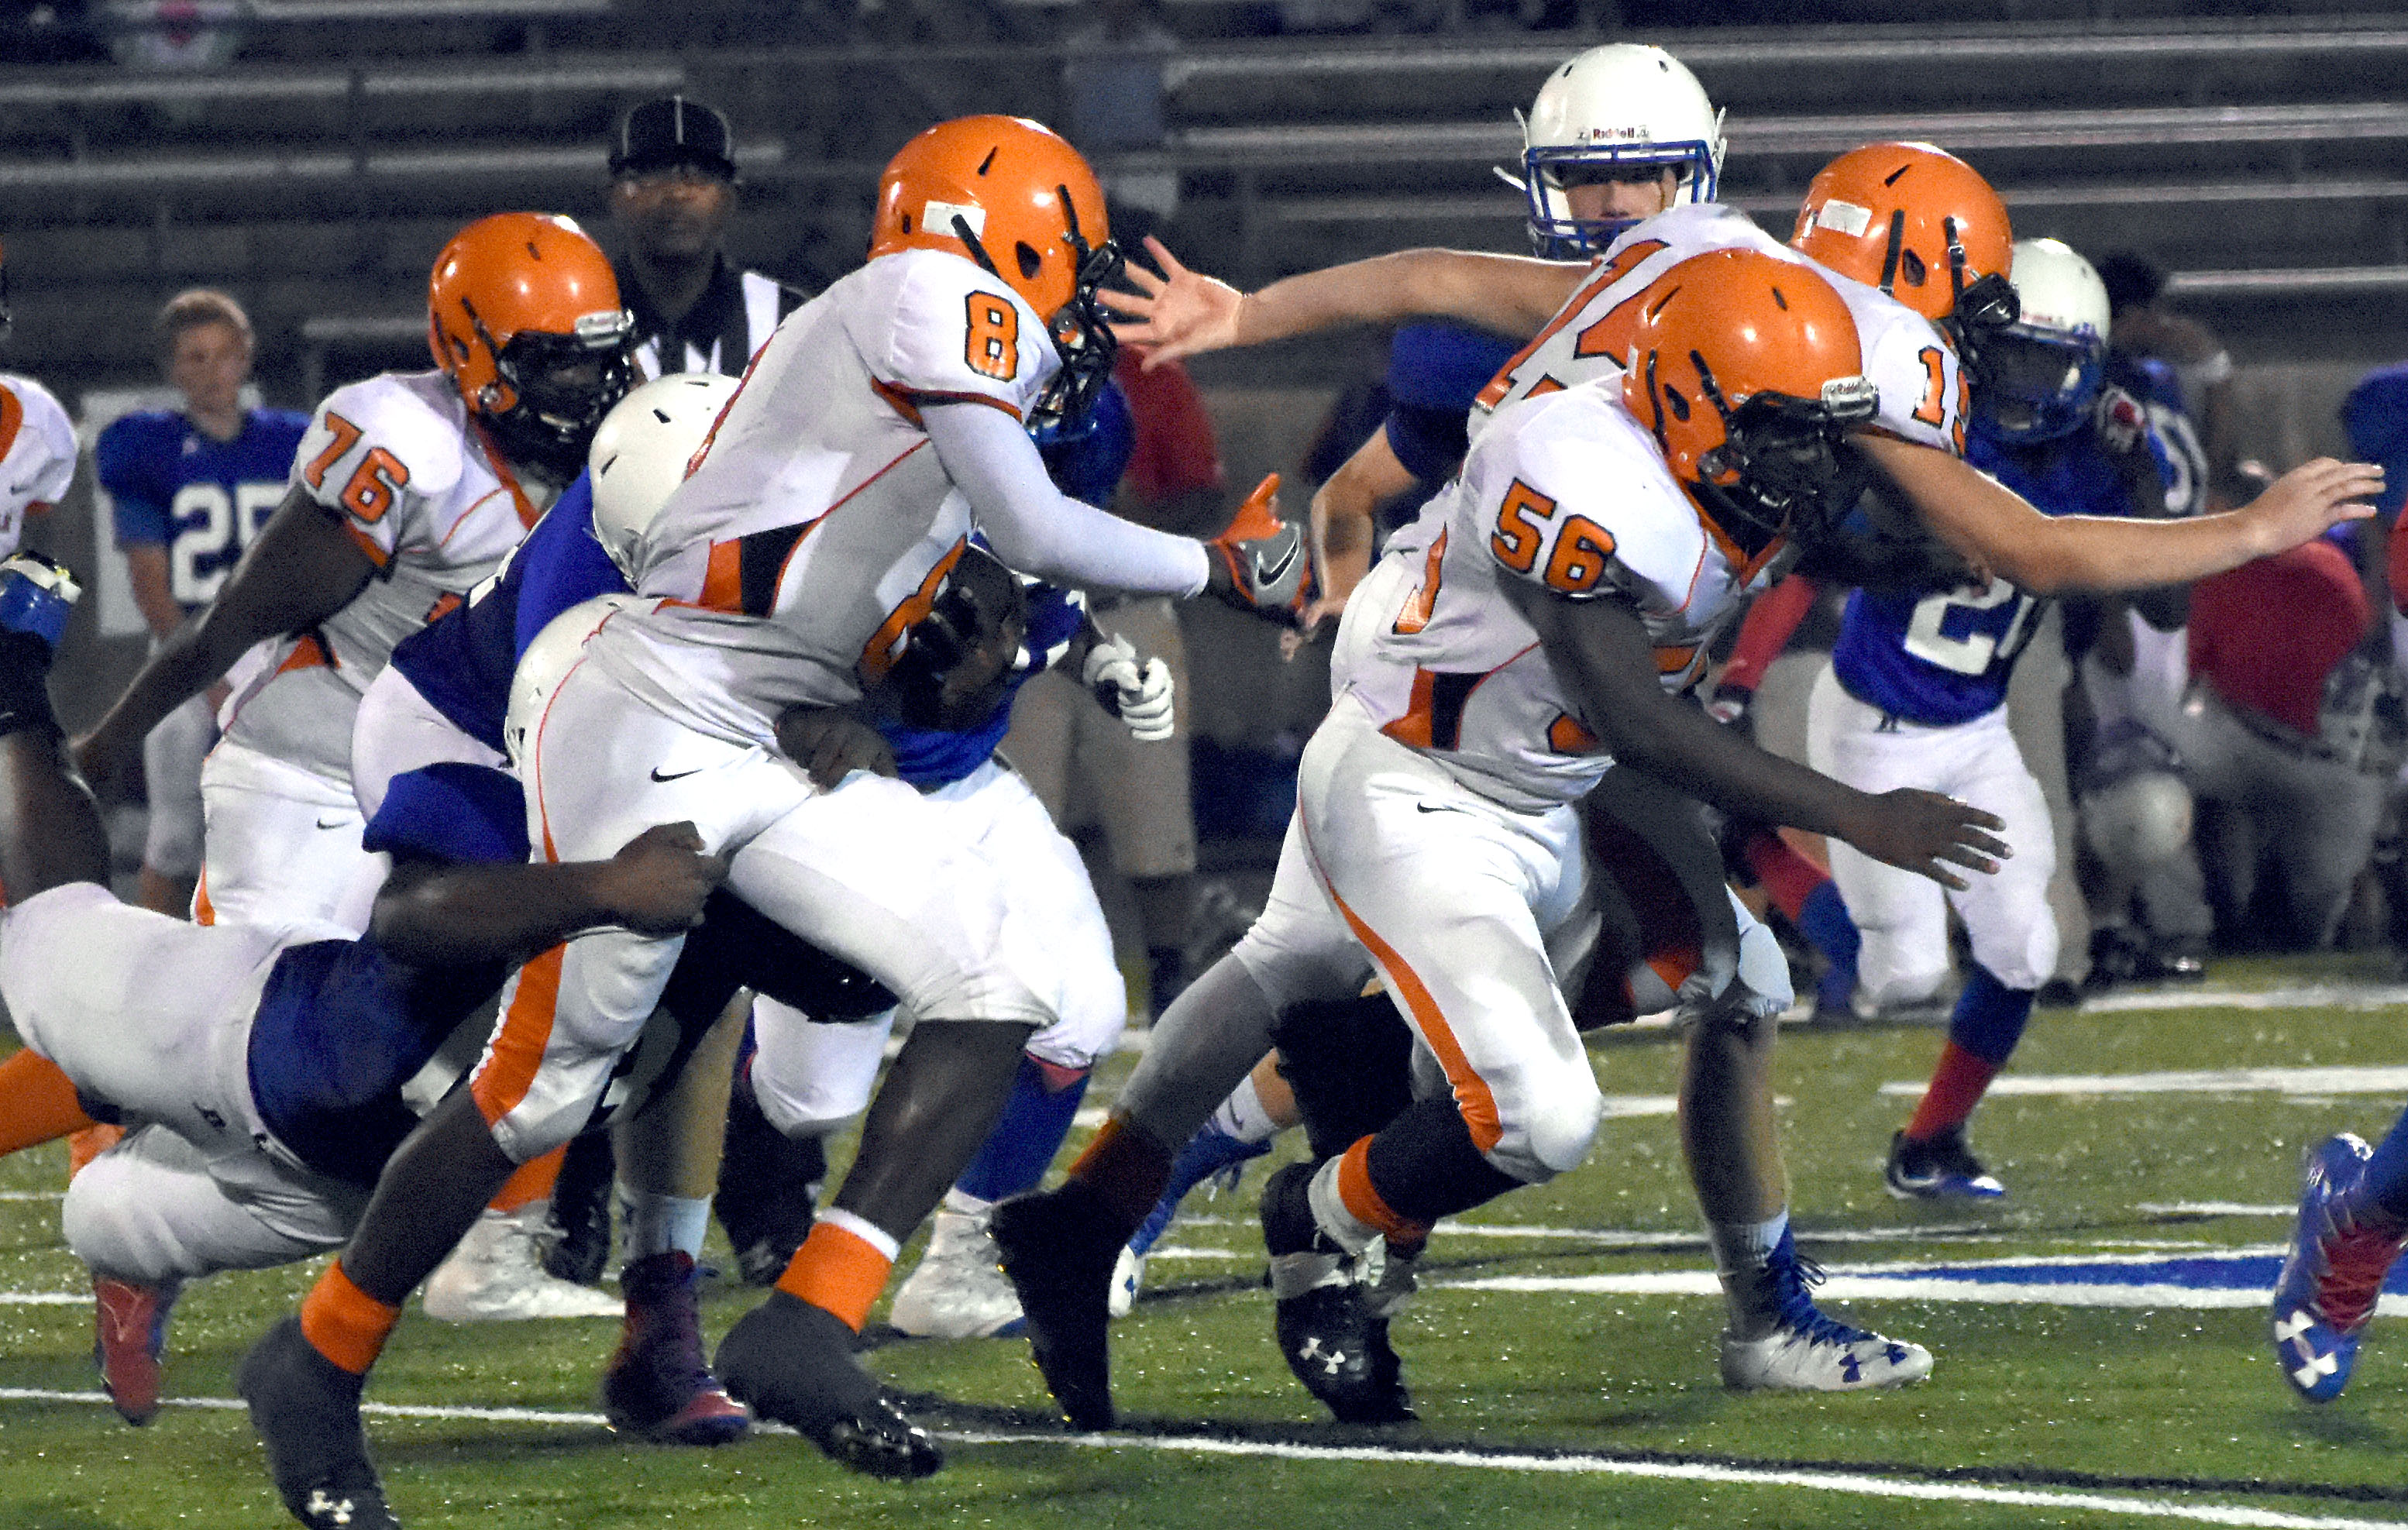 Kendrix Holcom (76), Ty Gordon (15) and Jalonte Gilliam (56) clear the way for Lance Easter (8) Nov. 3 in the Nashville Junior Scrappers 27-8 win at Arkadelphia.